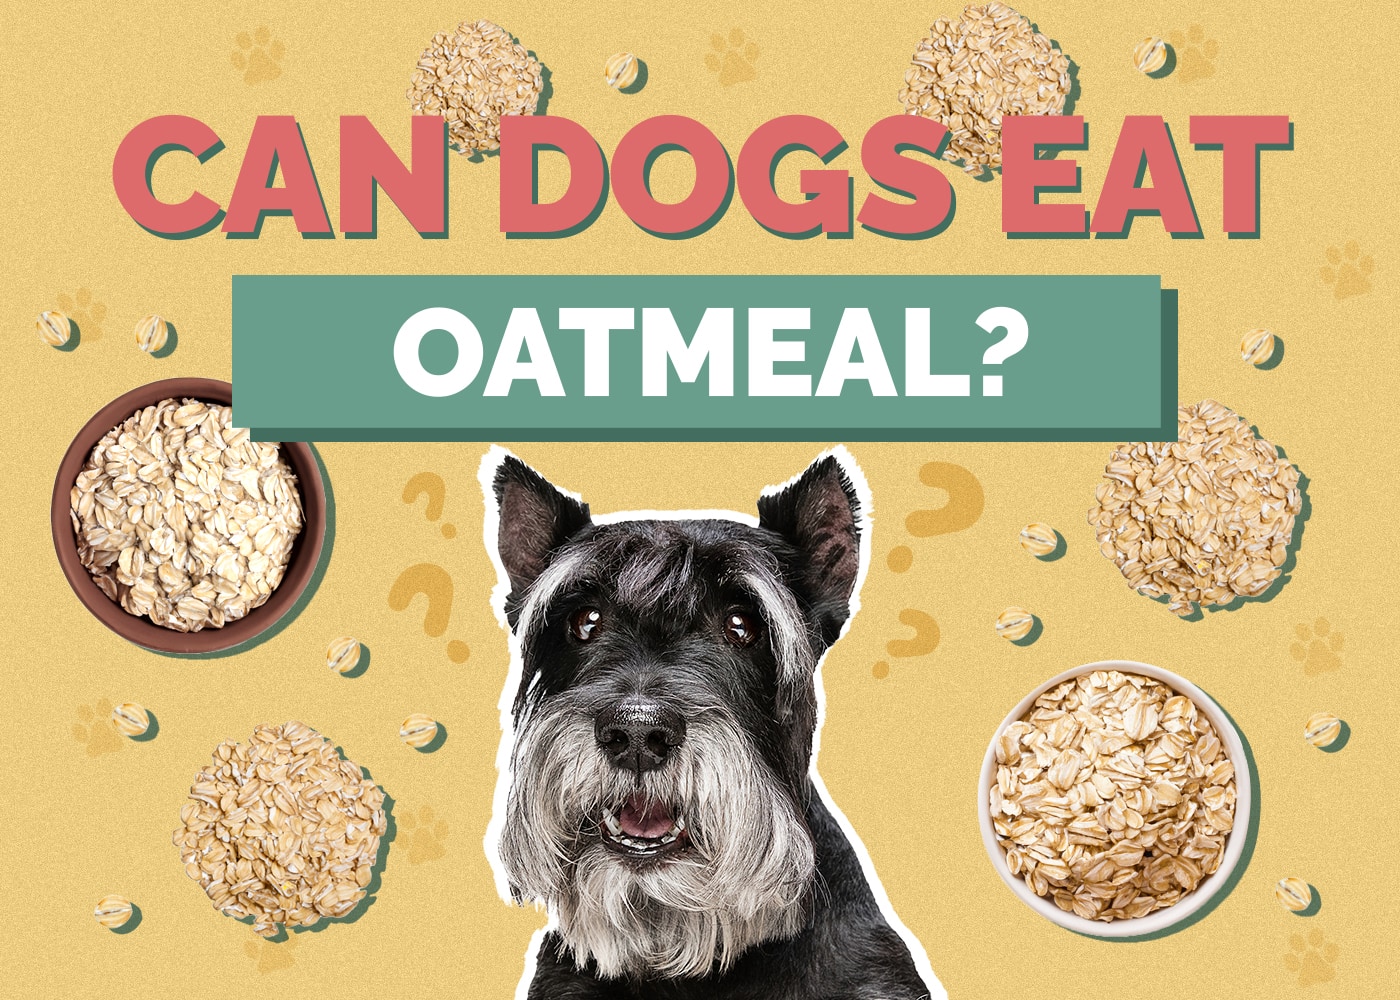 Can Dogs Eat oatmeal